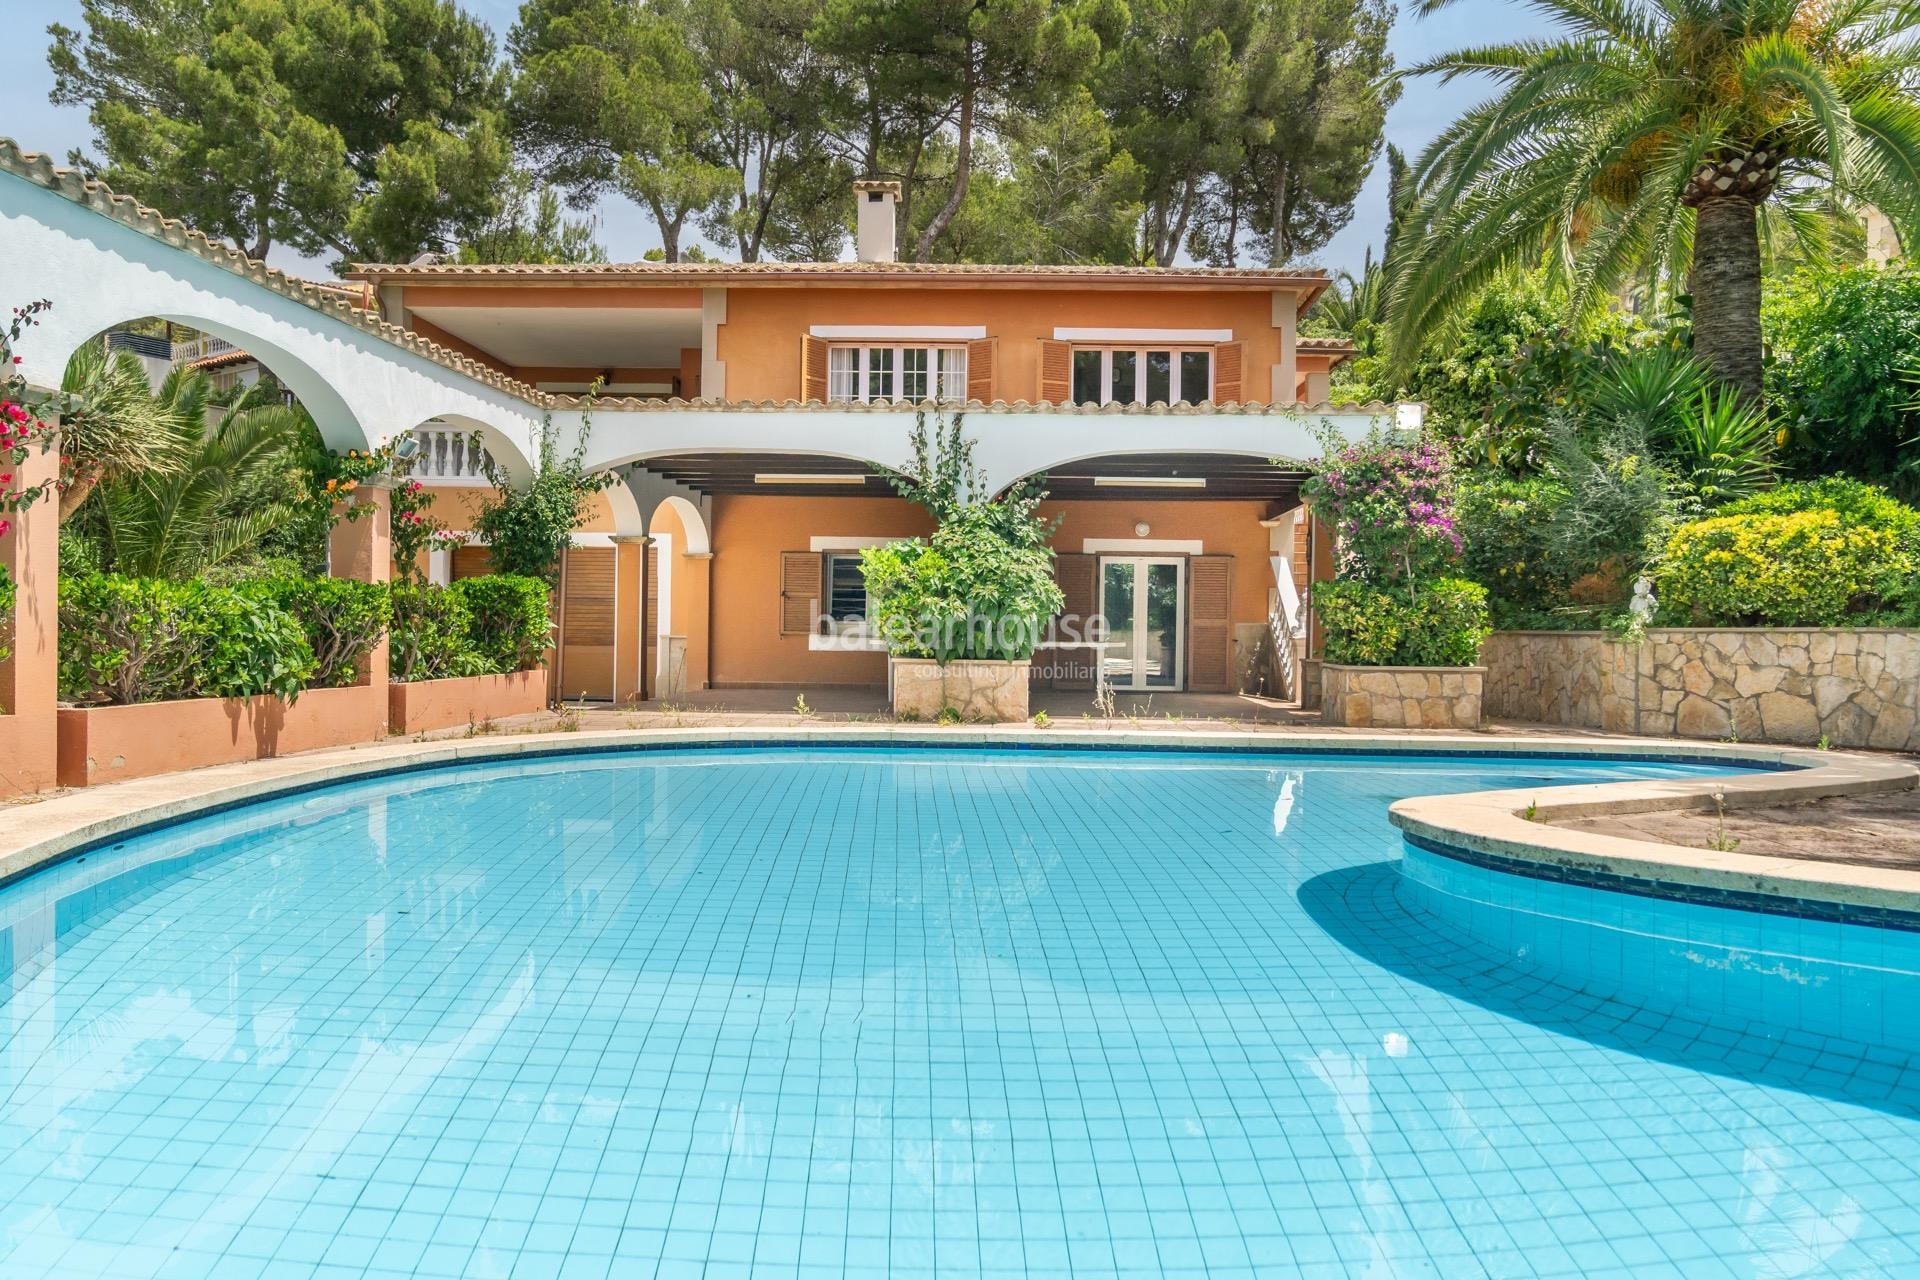 Well-maintained Mediterranean villa with large terraces and pool near the beach in Santa Ponsa